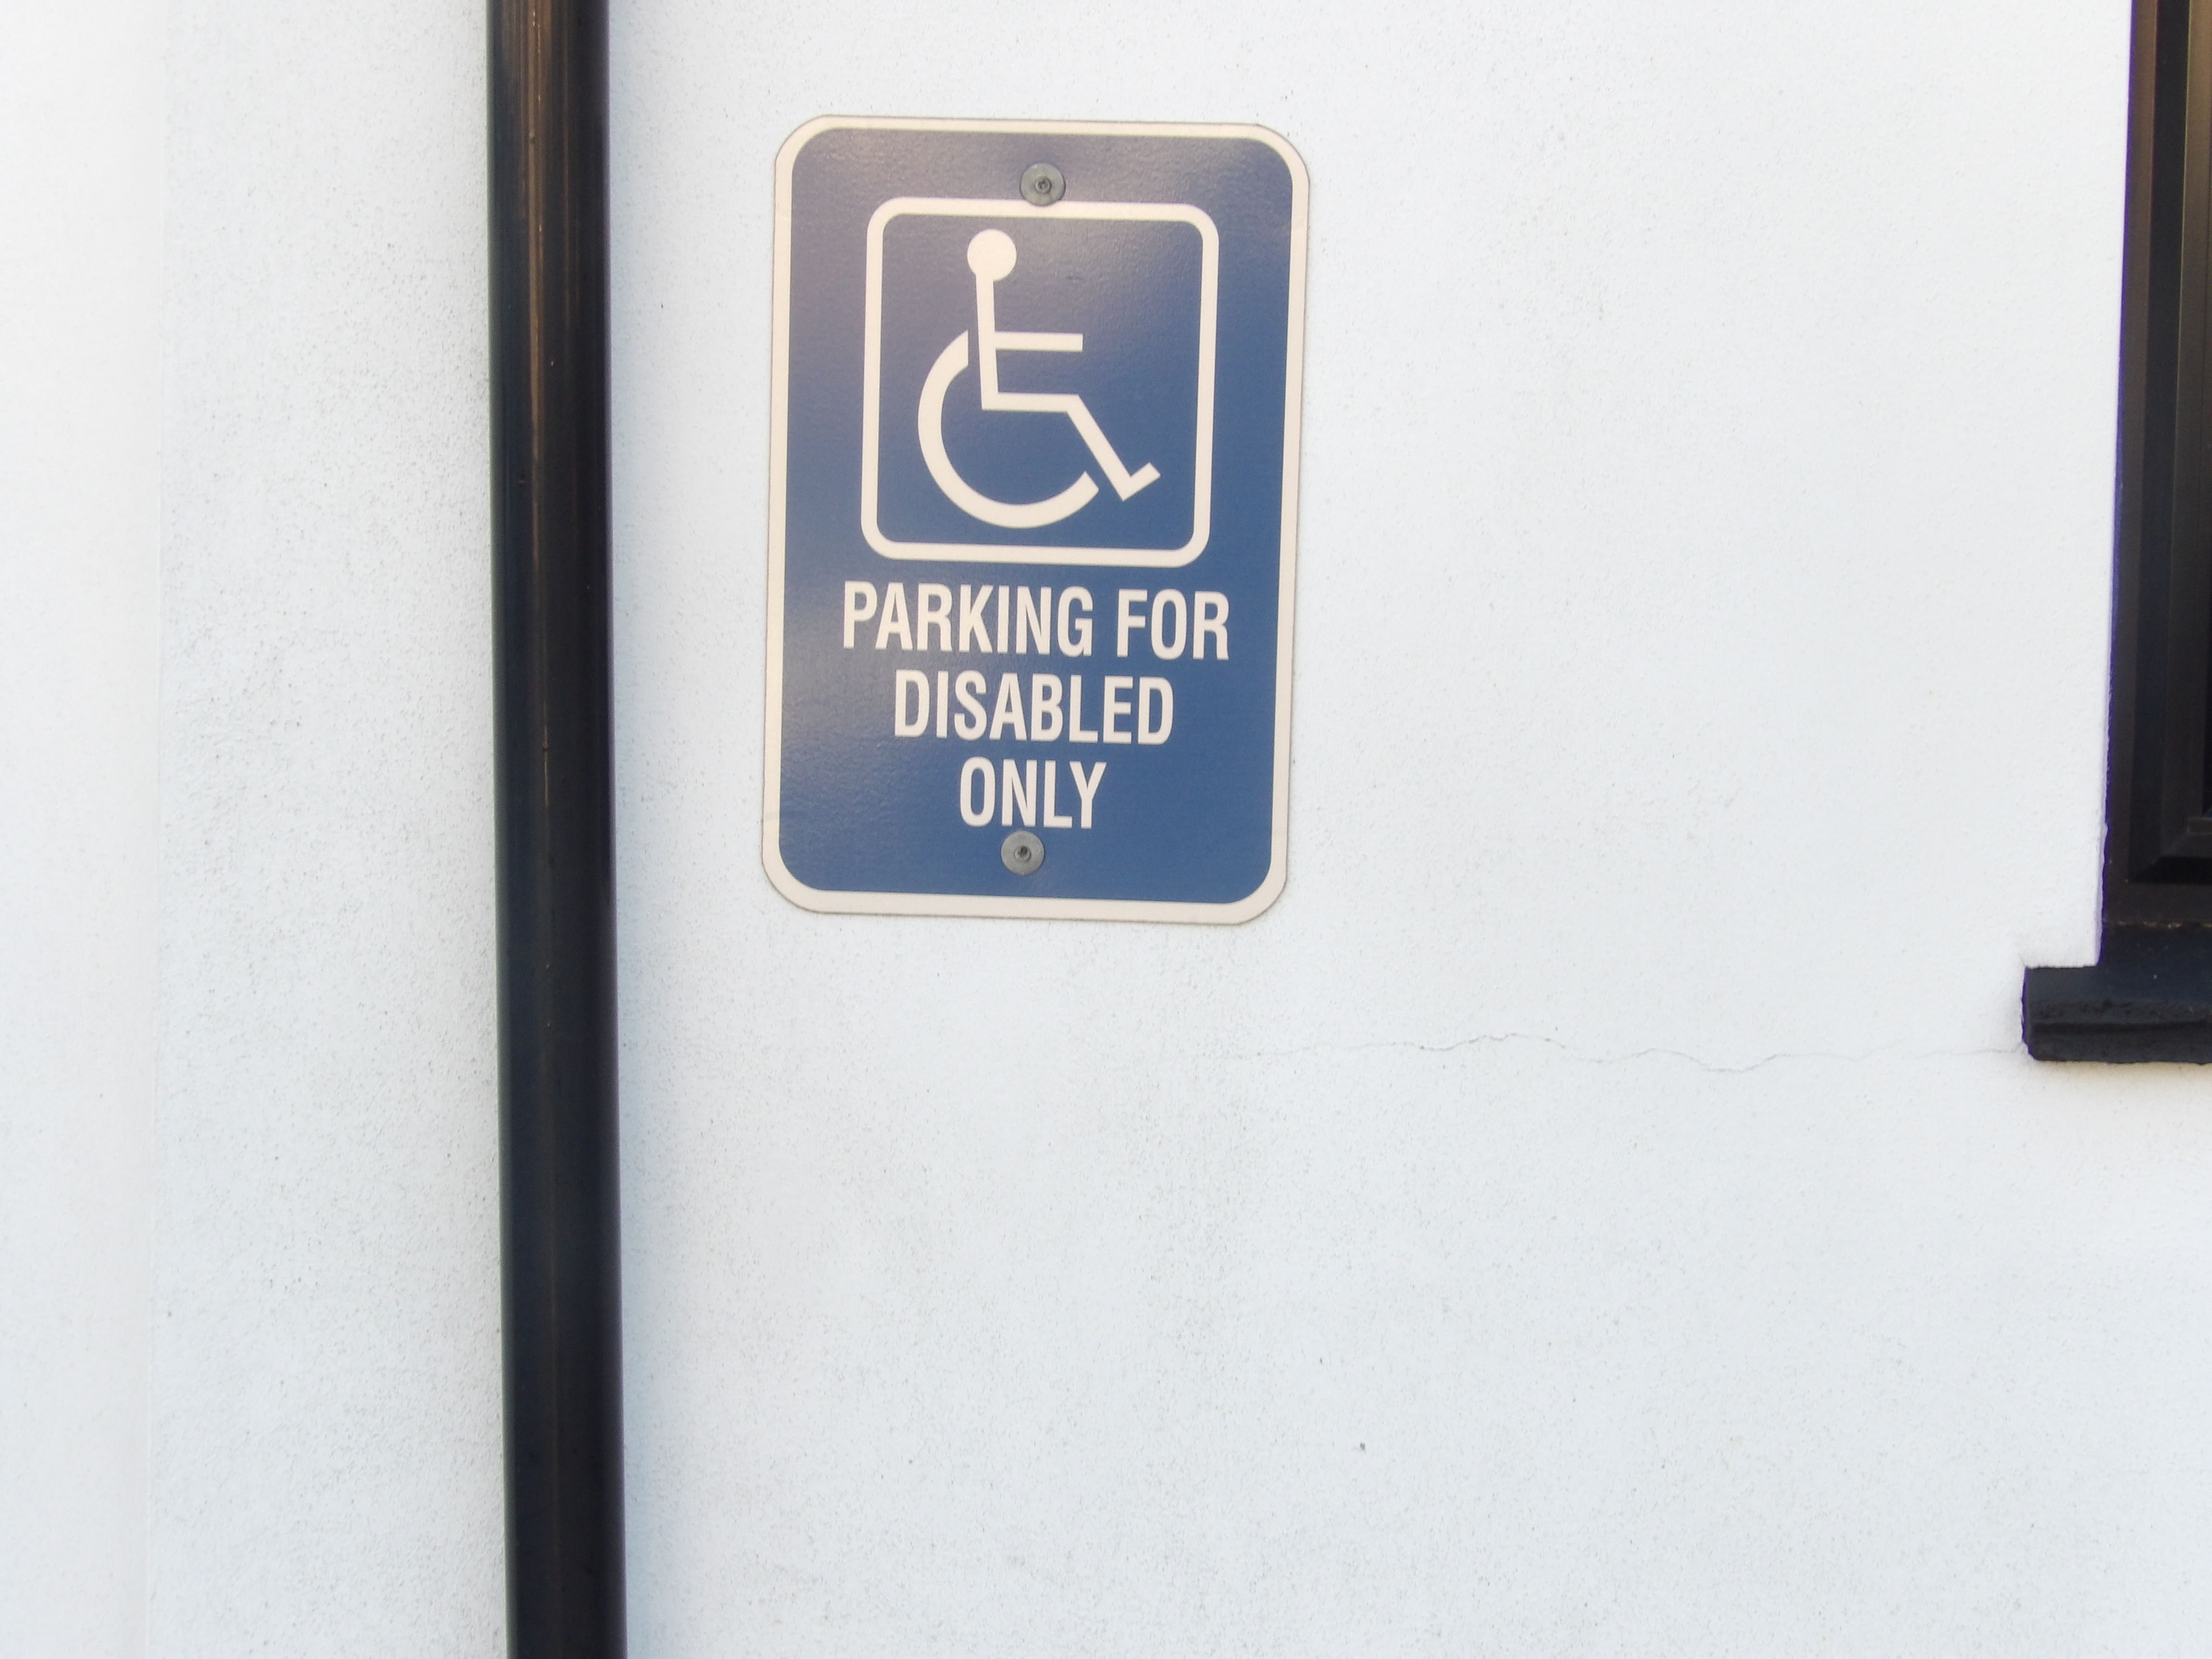 Priority of onsite parking is for blue badge holders